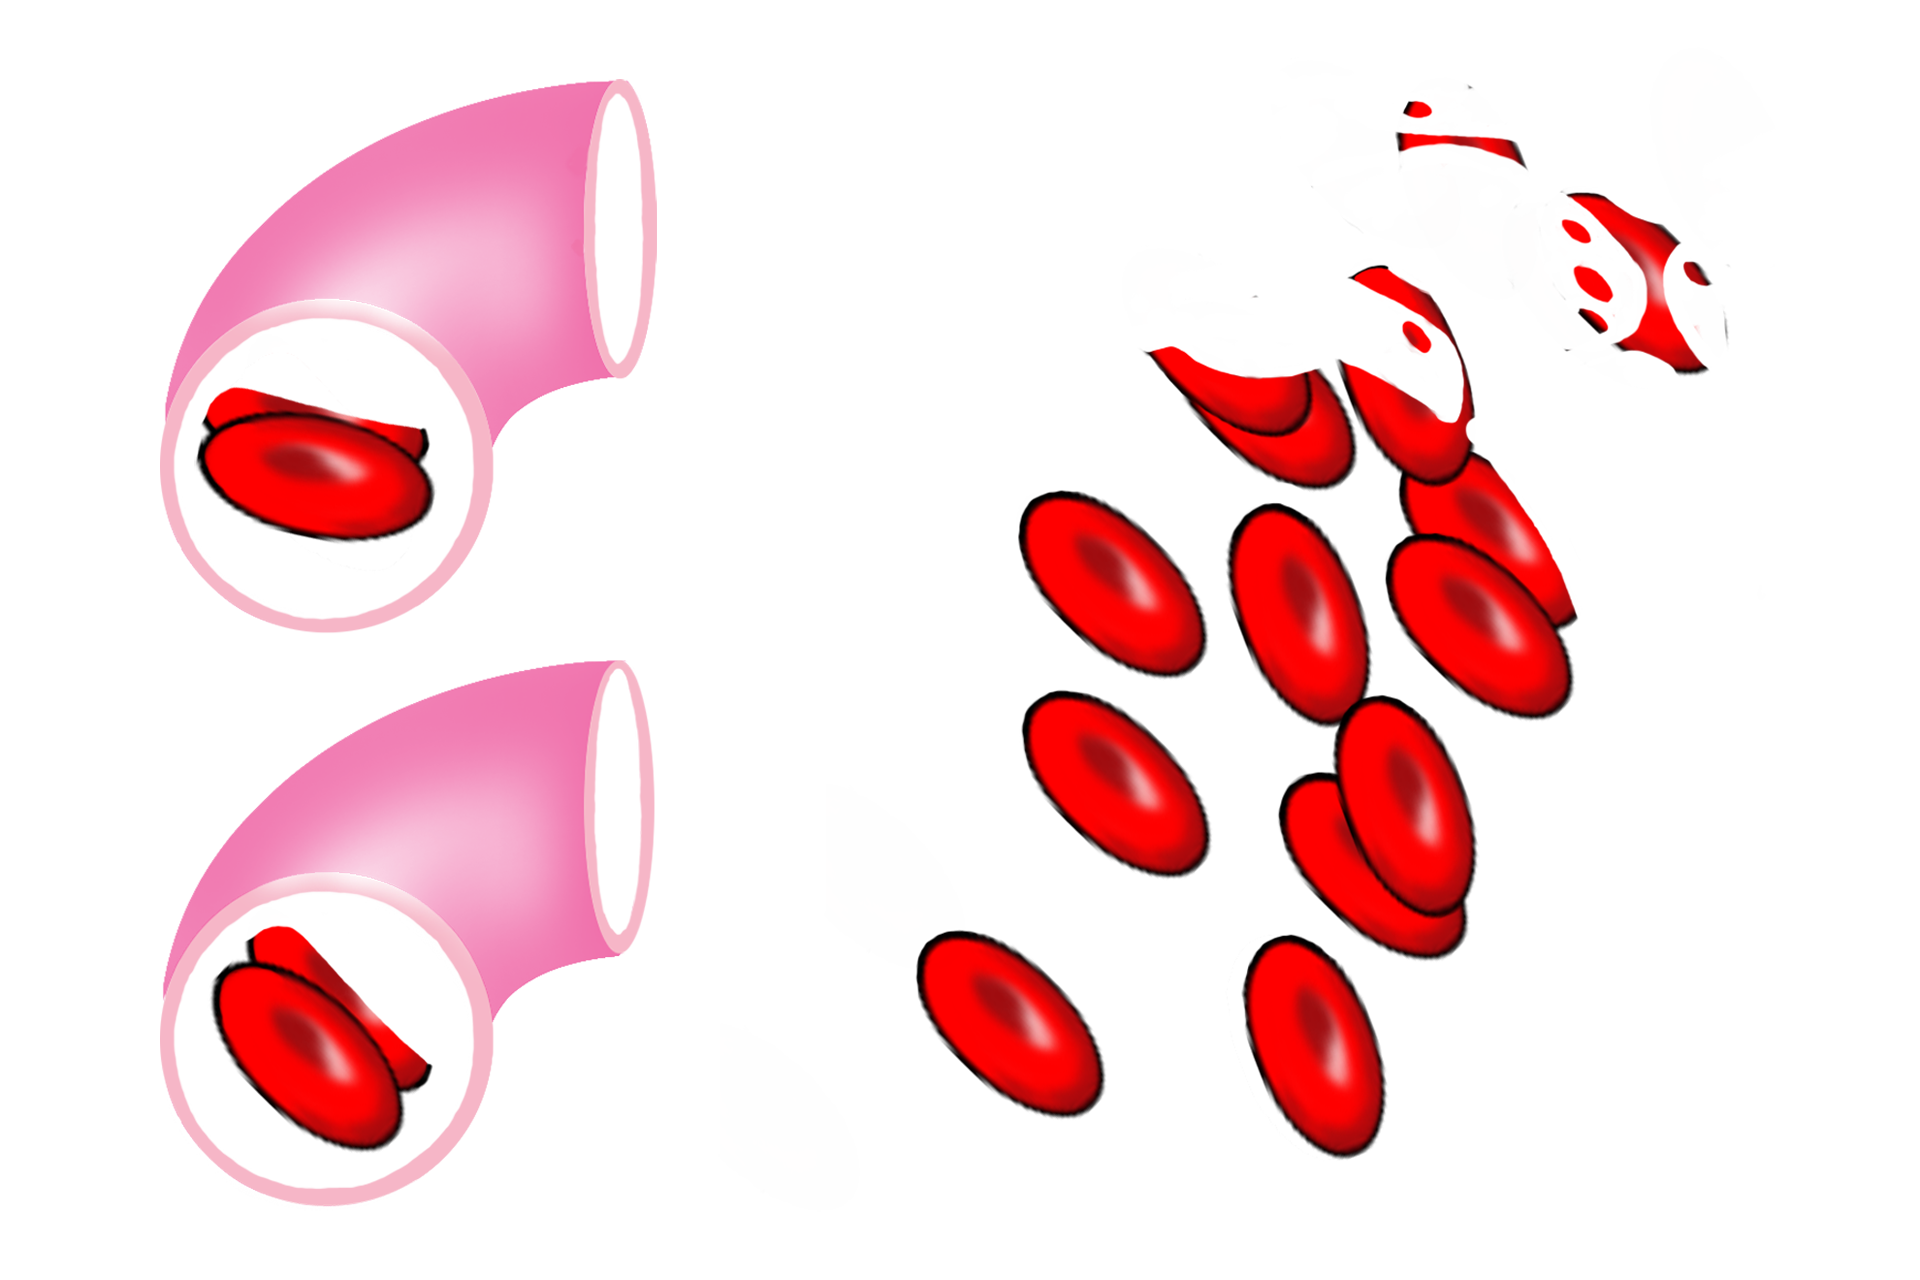 Red blood cells > <p>Continuous and fenestrated capillaries are so narrow that red blood cells flow through them in single file. Discontinuous capillaries have much wider lumens, allowing multiple cells to flow through simultaneously. They also transport blood at a slower rate than do smaller diameter capillaries.</p>
